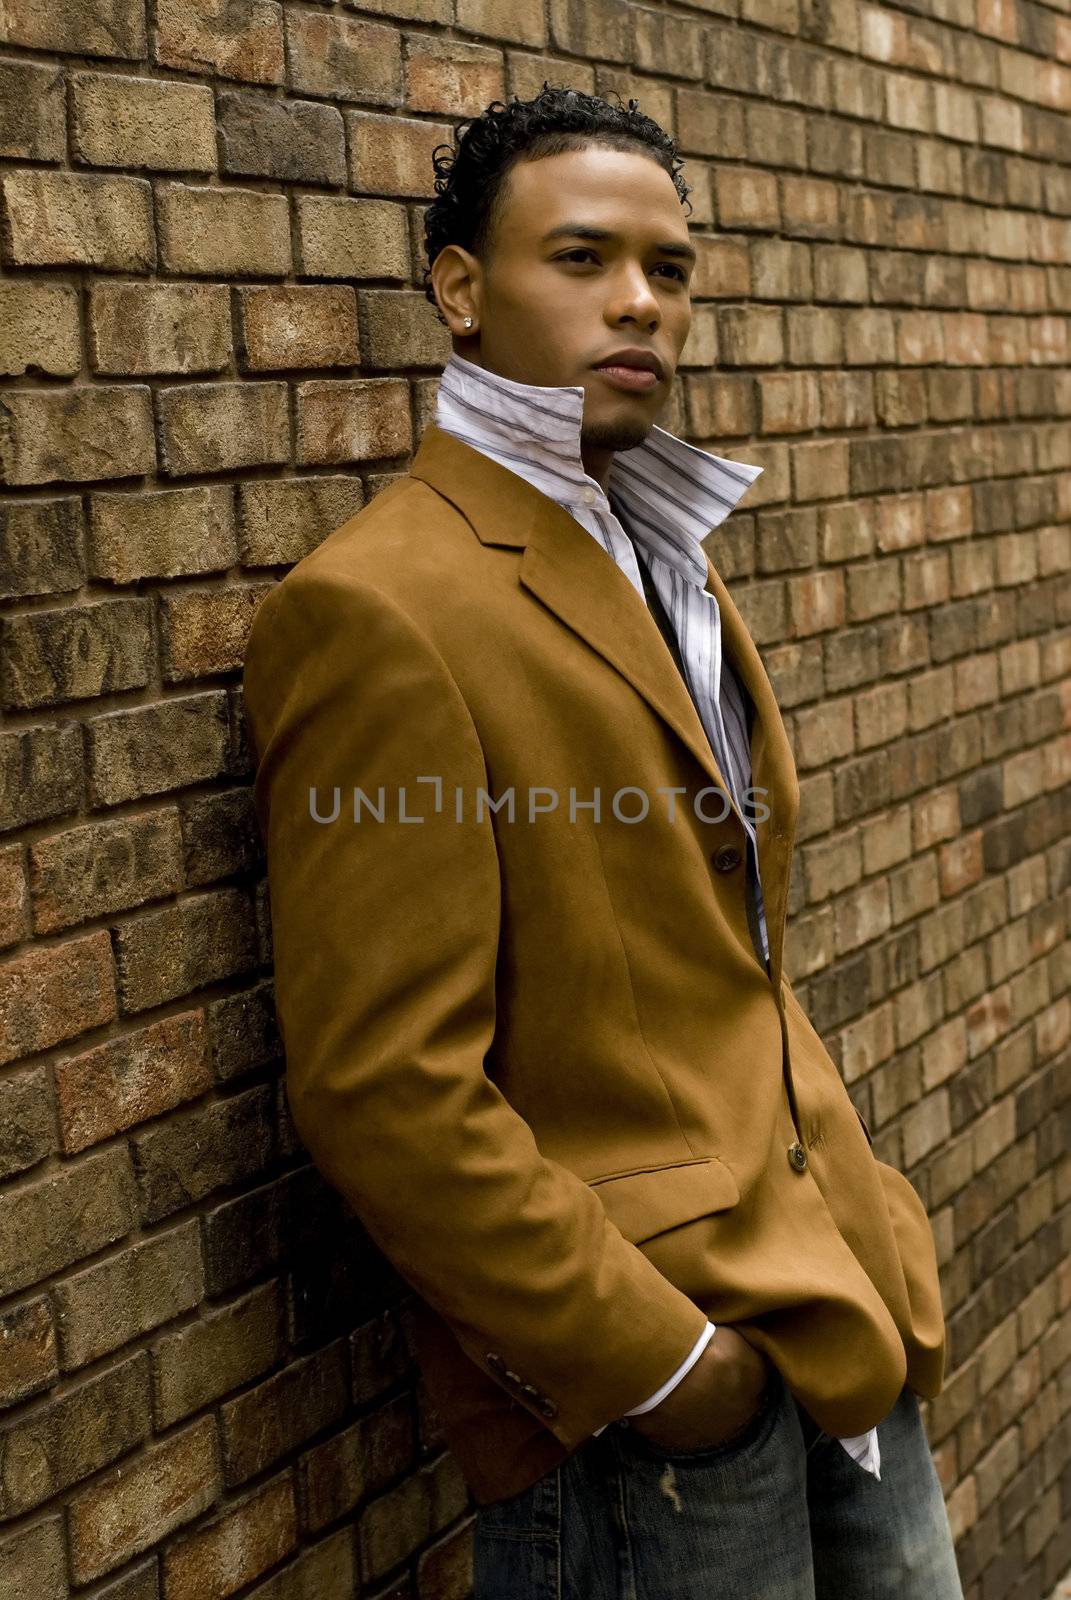 Attractive young man in a suit and jeans against a wall.